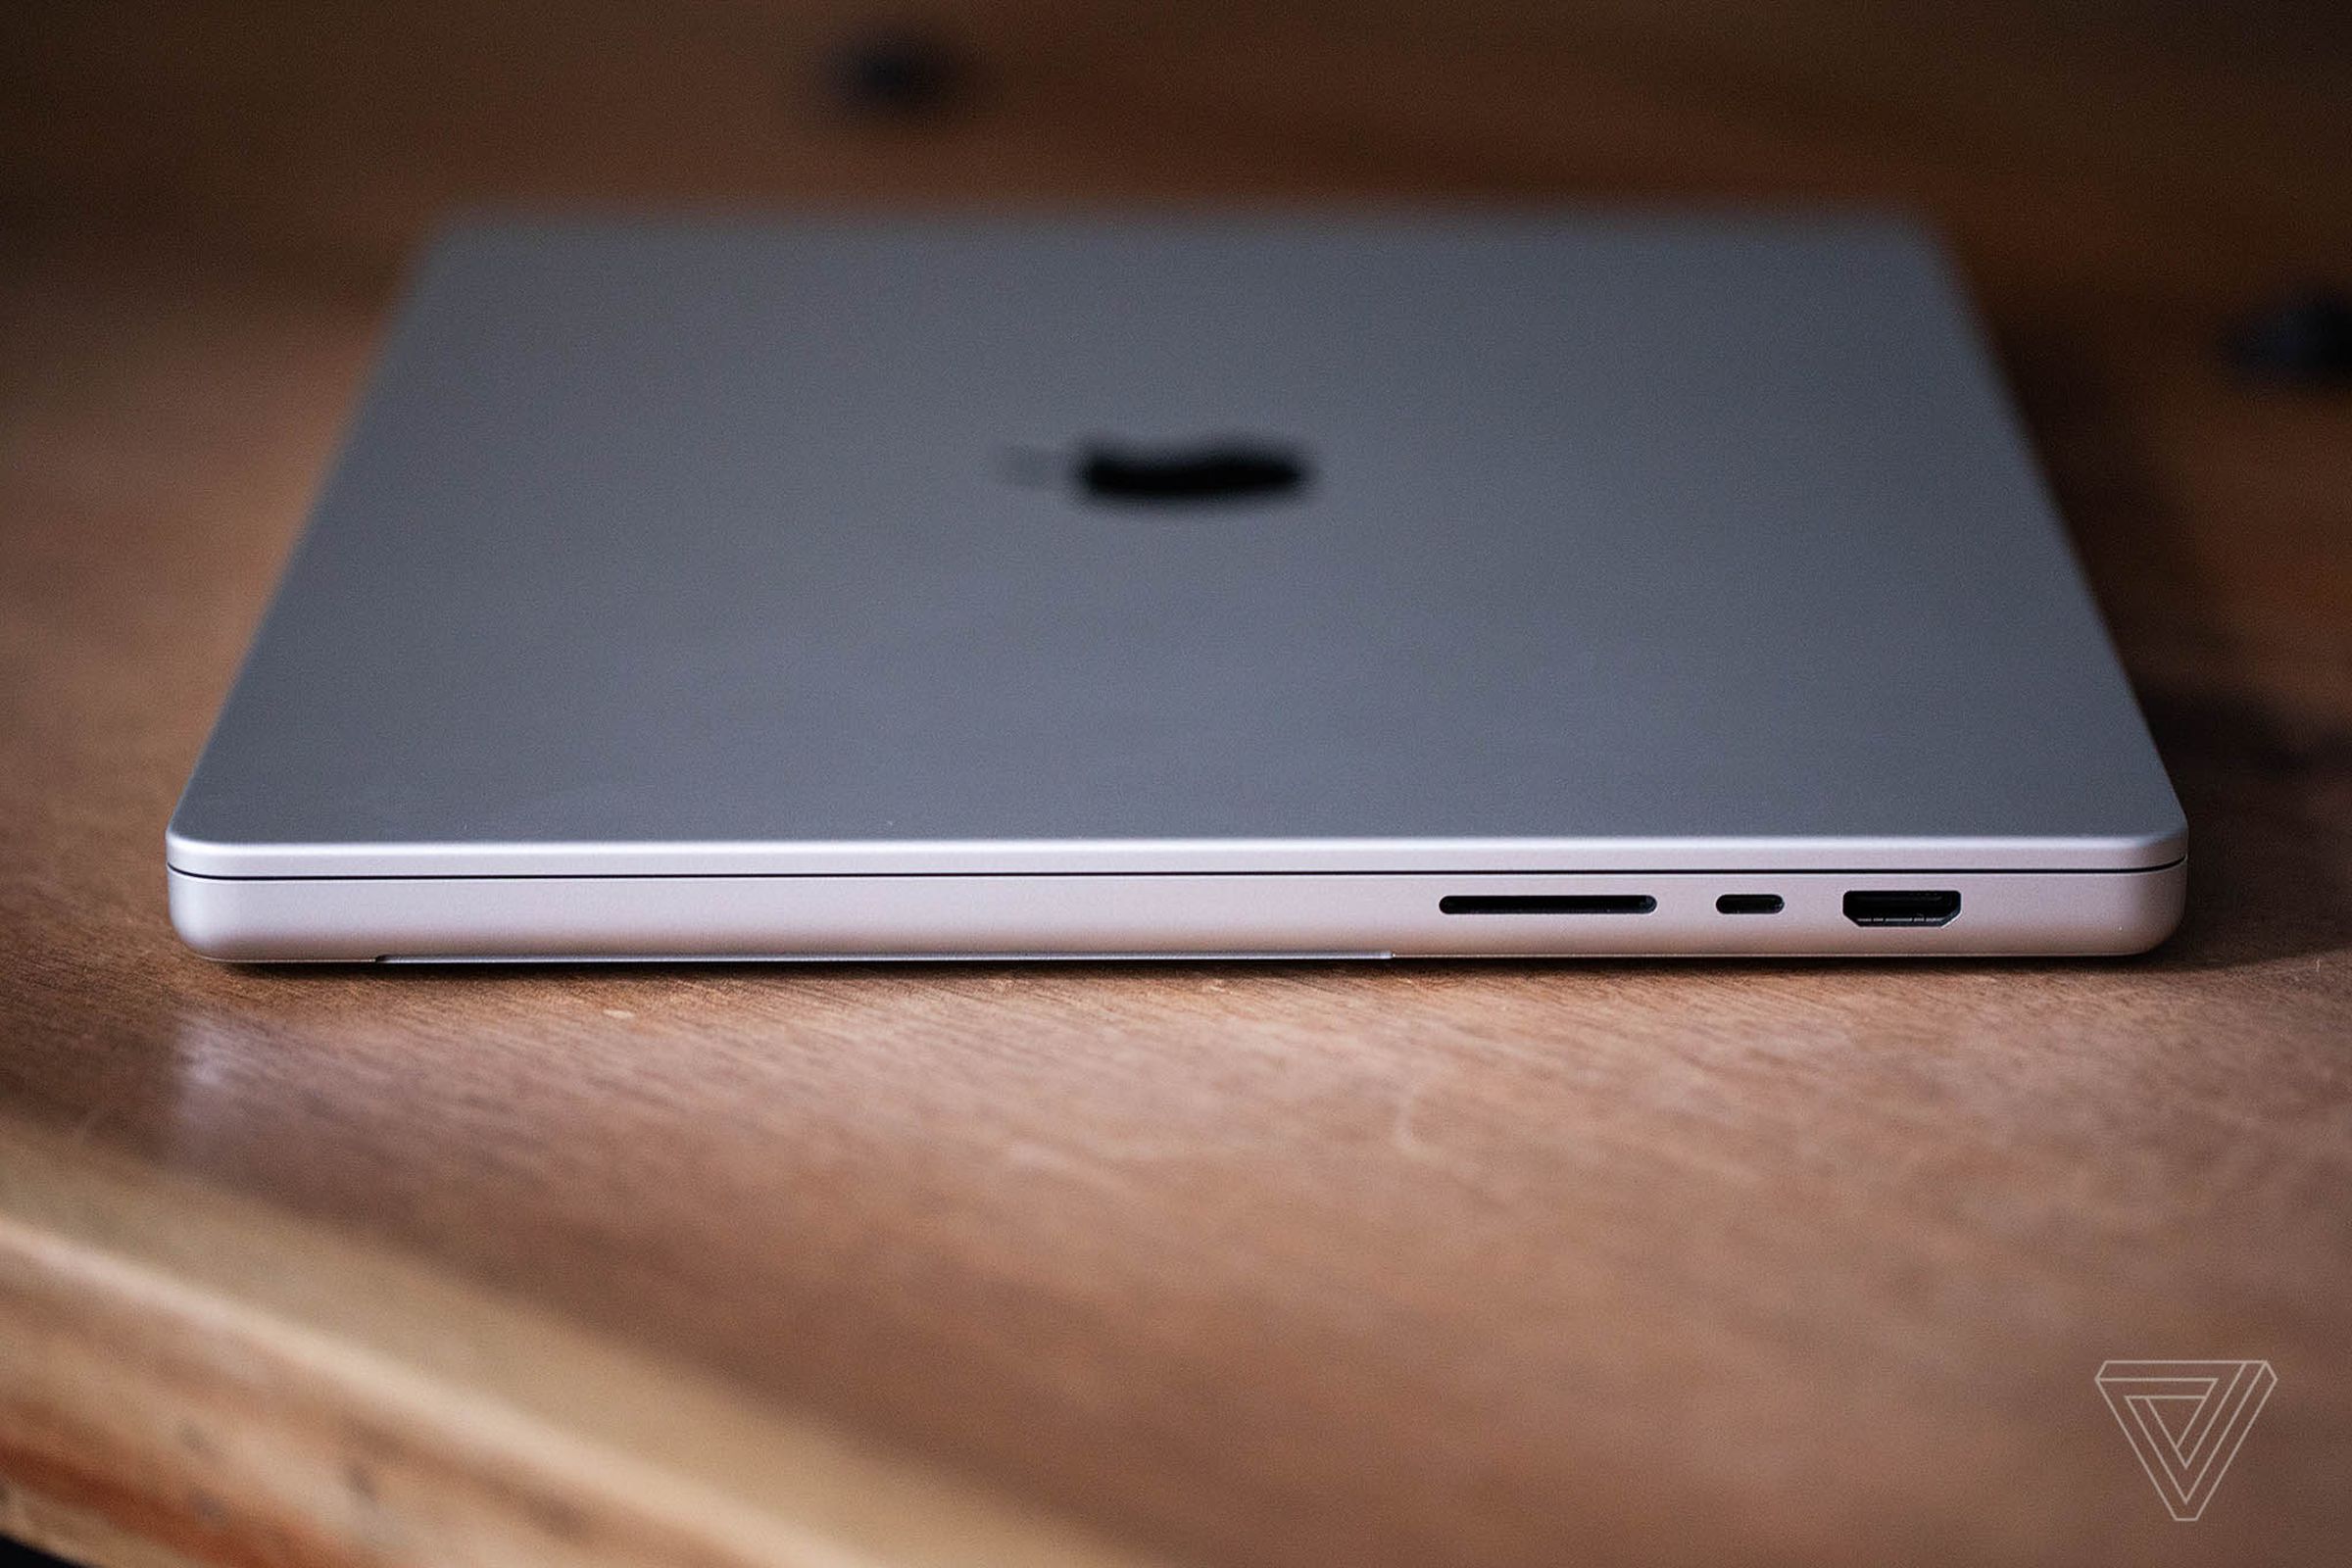 More devices need to follow in the footsteps of Apple’s recent (bigger) MacBook Pros